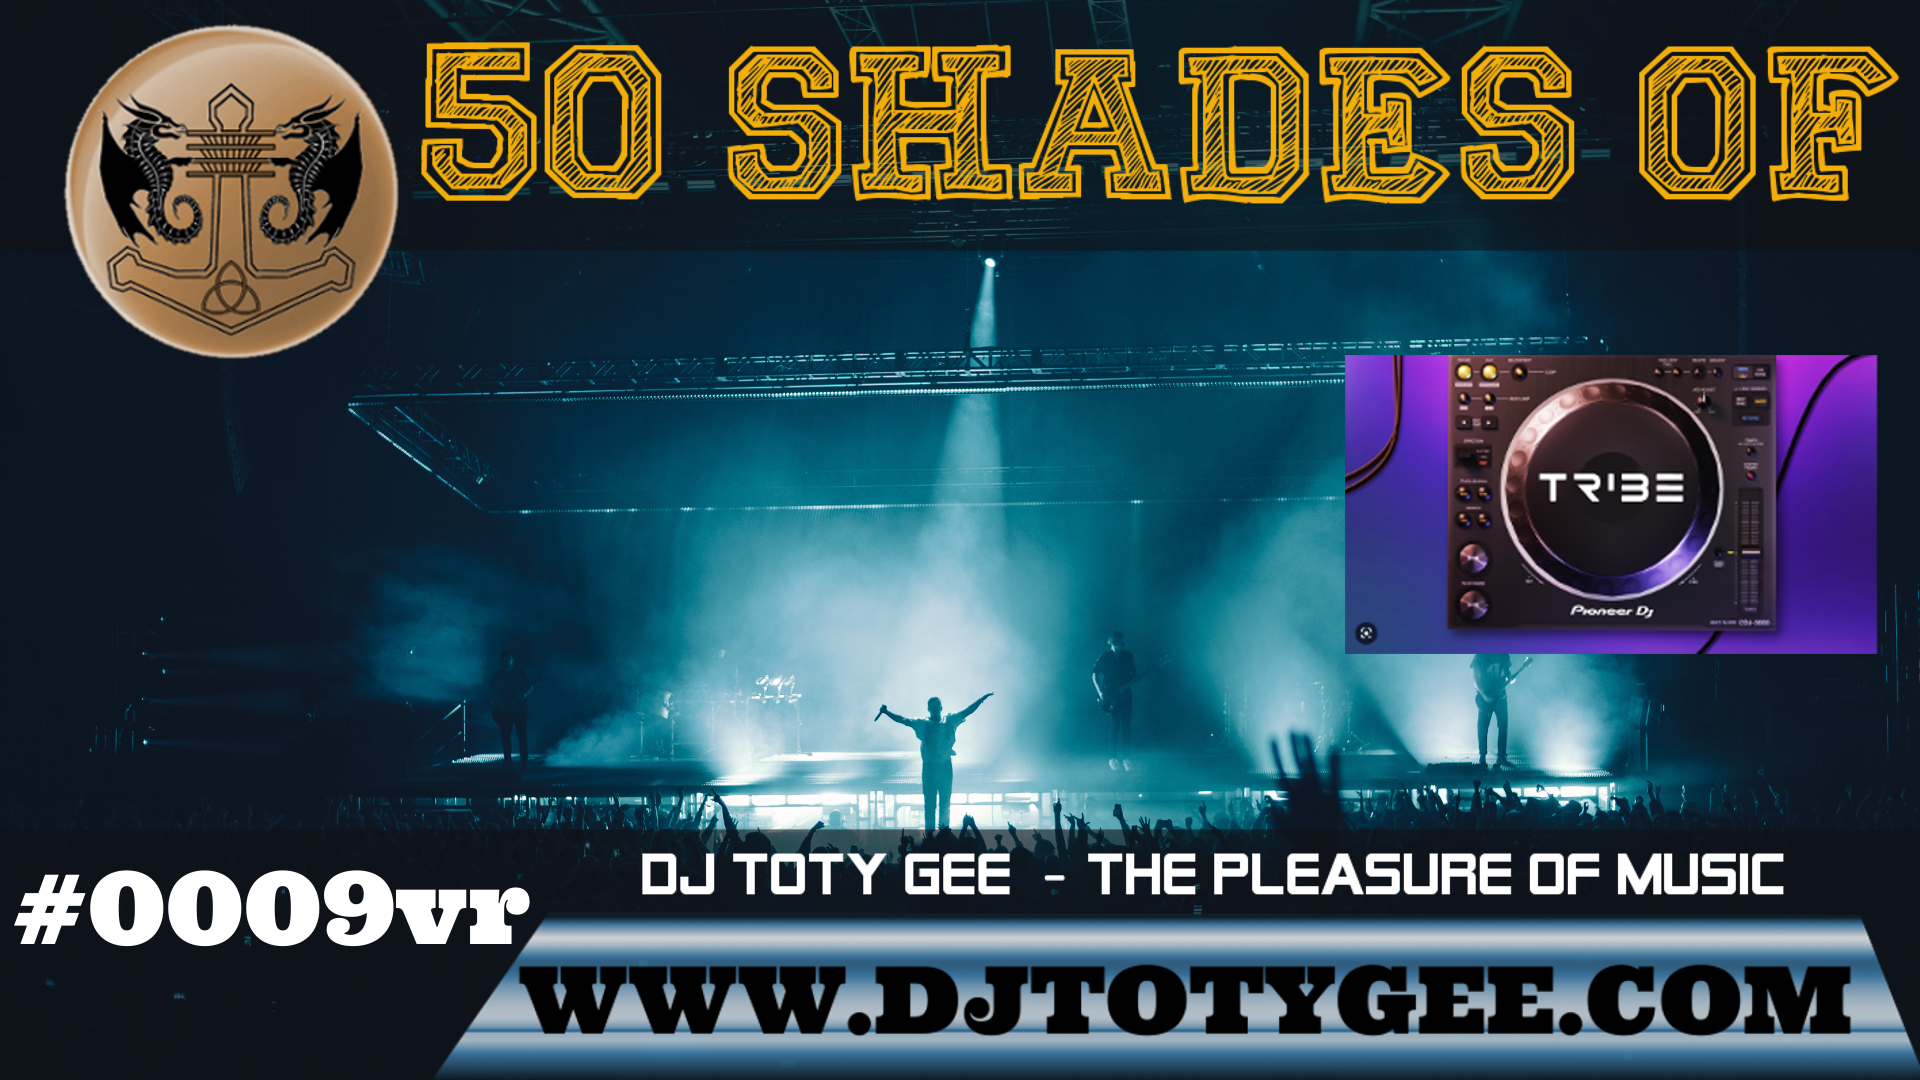 50 Shades of DJ TOTY GEE with TRIBEXR #0009